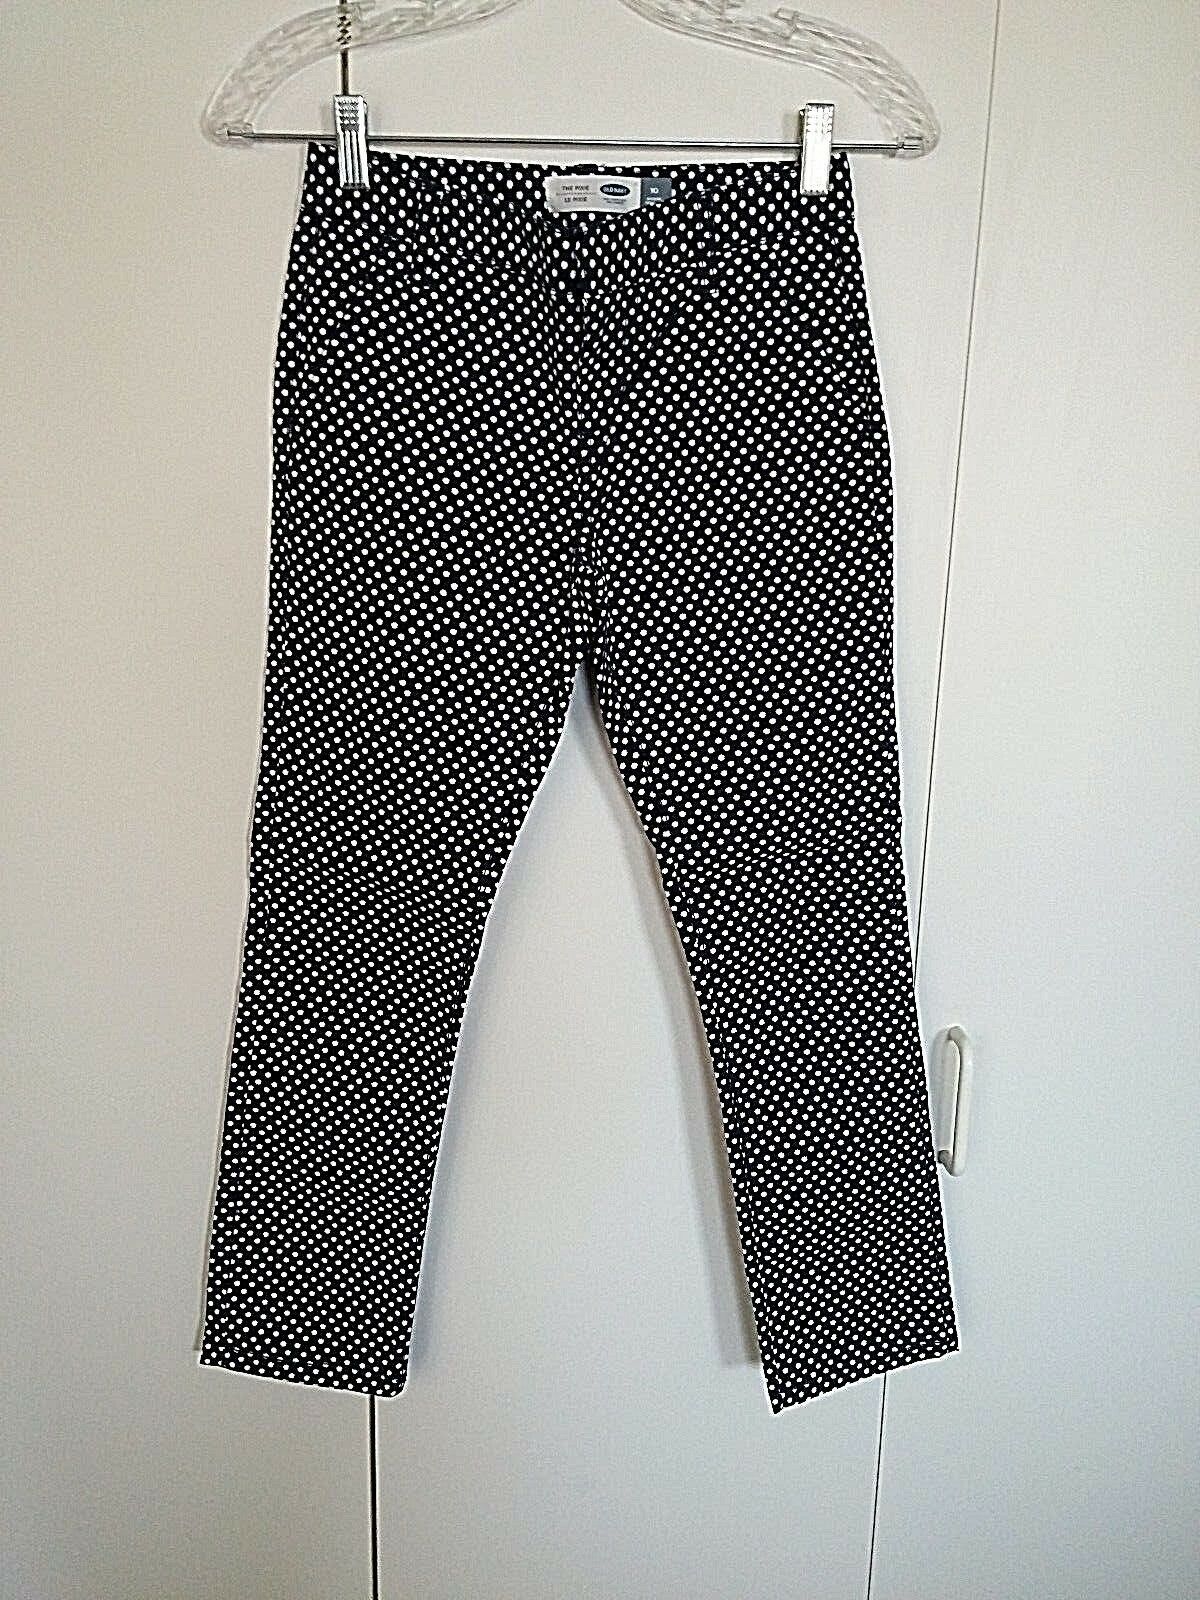 OLD NAVY THE PIXIE GIRL'S POLKA DOT PANTS-10-COTTON/SPANDEX-BARELY WORN-CUTE - £4.71 GBP